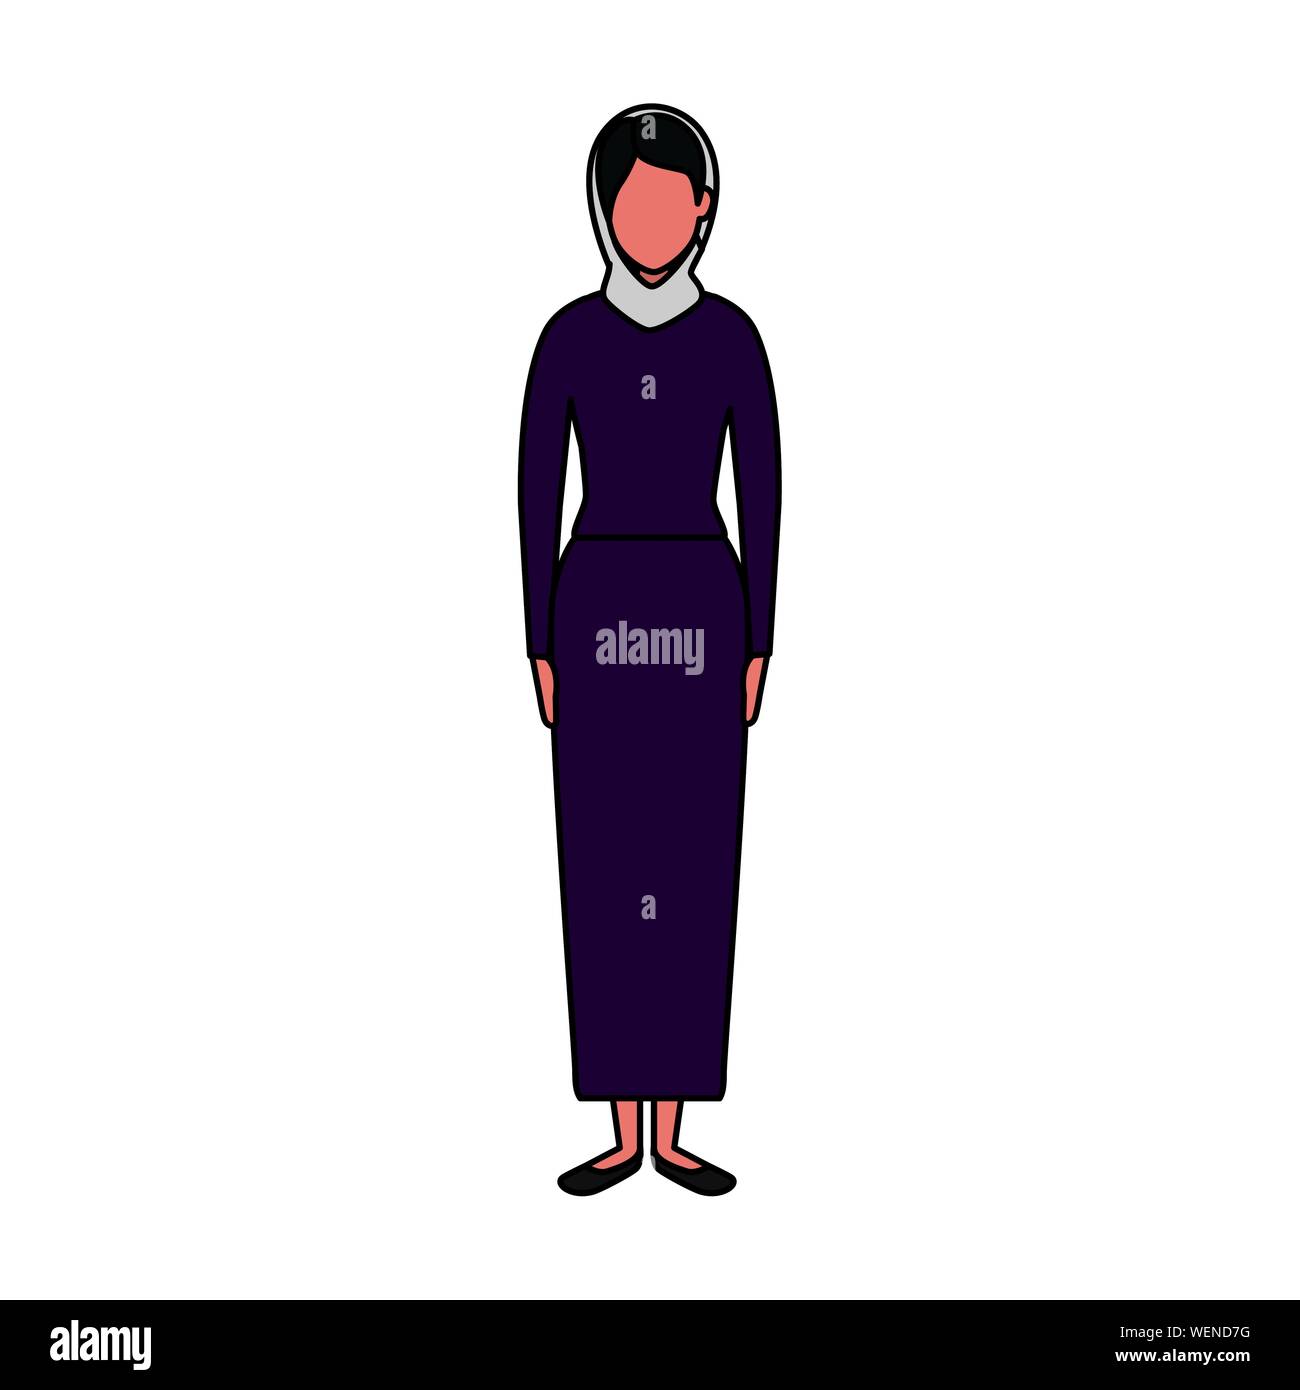 islamic woman with traditional burka Stock Vector